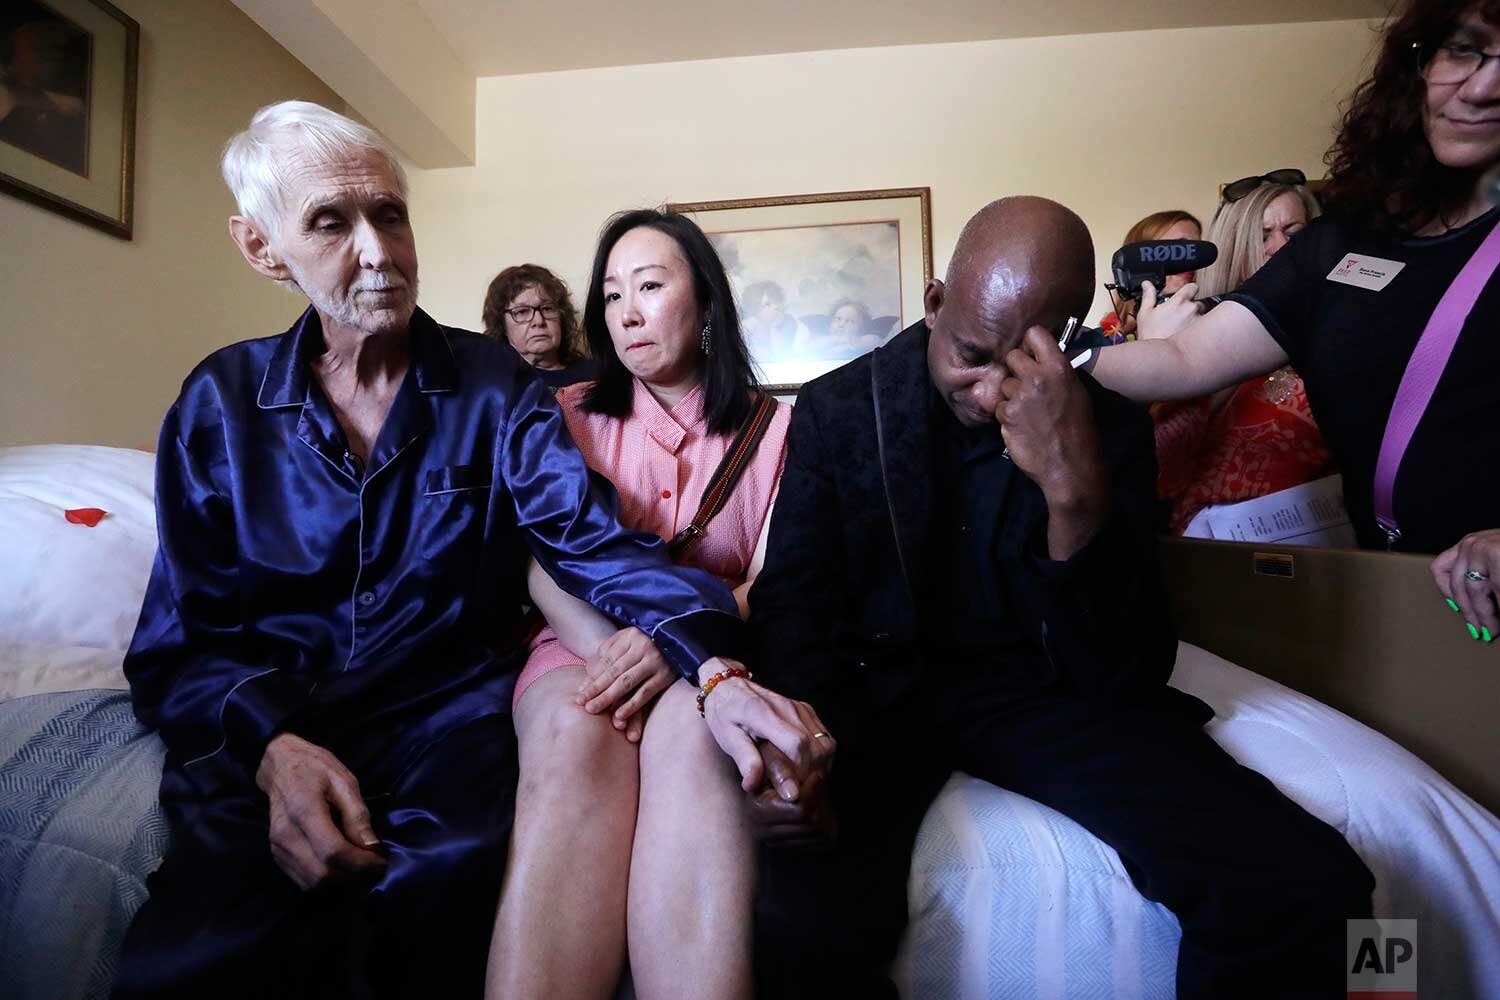  In this May 10, 2019, photo, Robert Fuller, left, consoles friends gathered on and near his bed as he makes his final preparations before dying, in Seattle. (AP Photo/Elaine Thompson) 